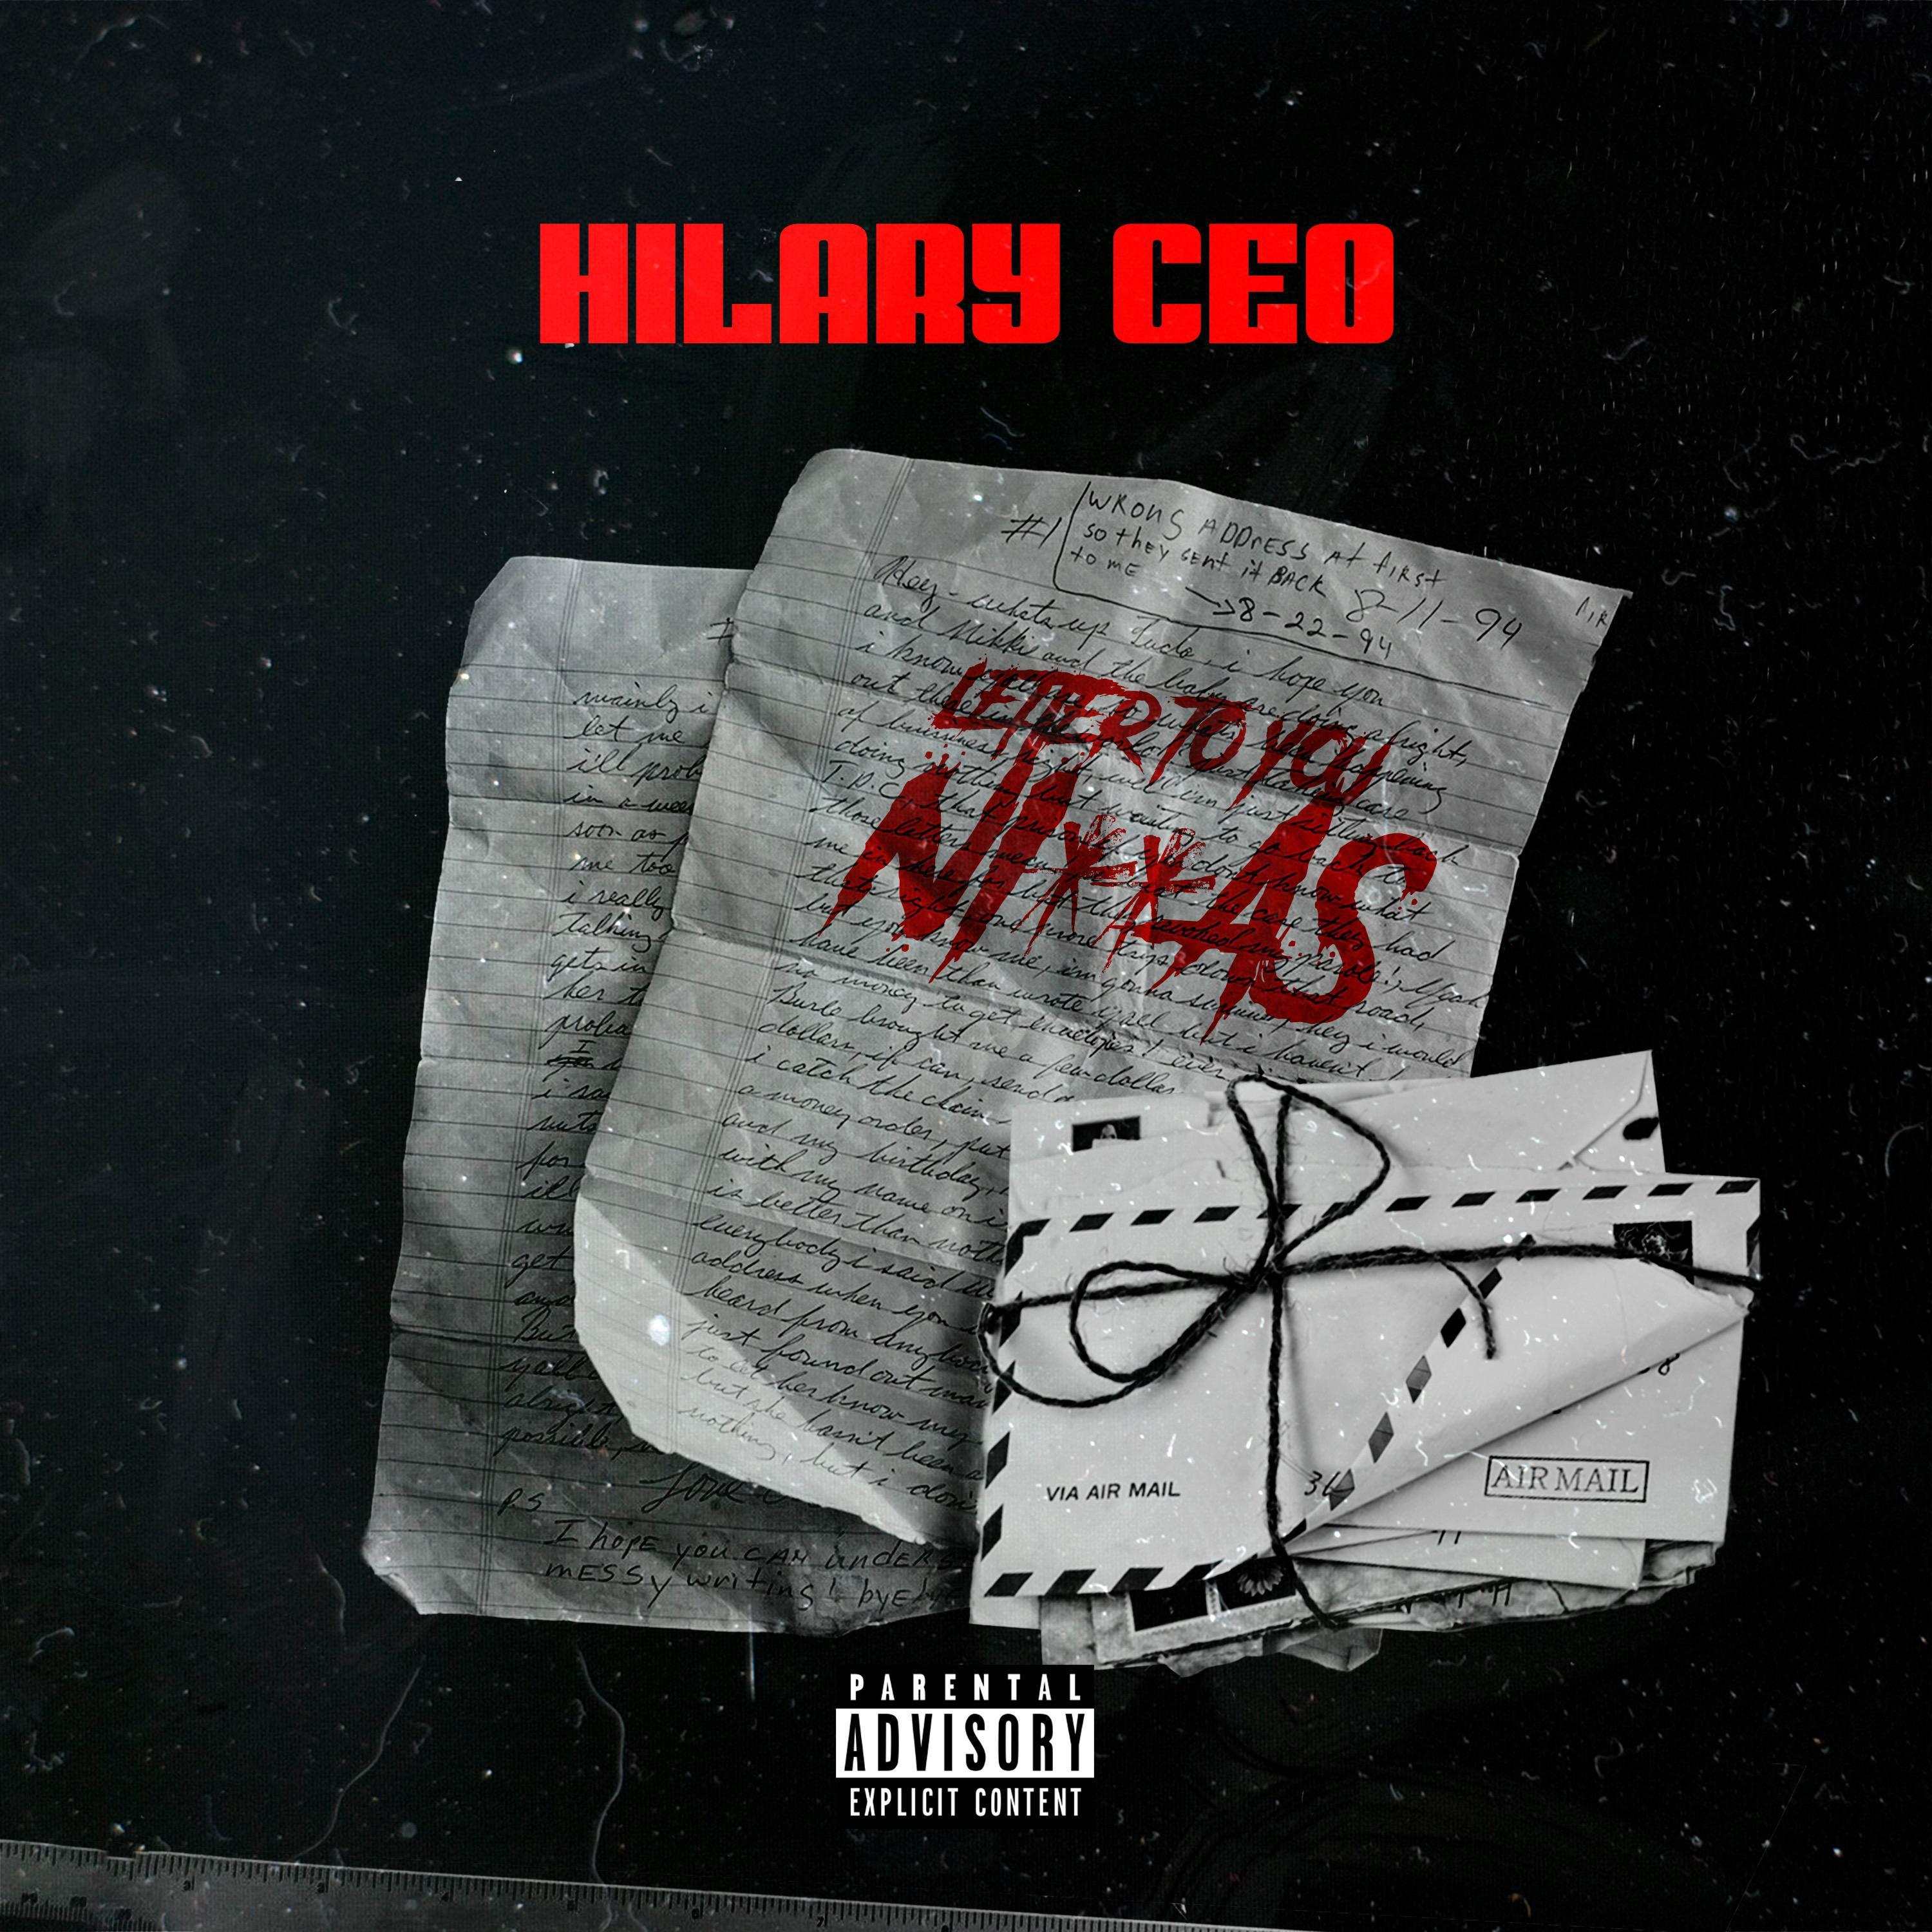 Hilary CEO - Letter to you Niggas